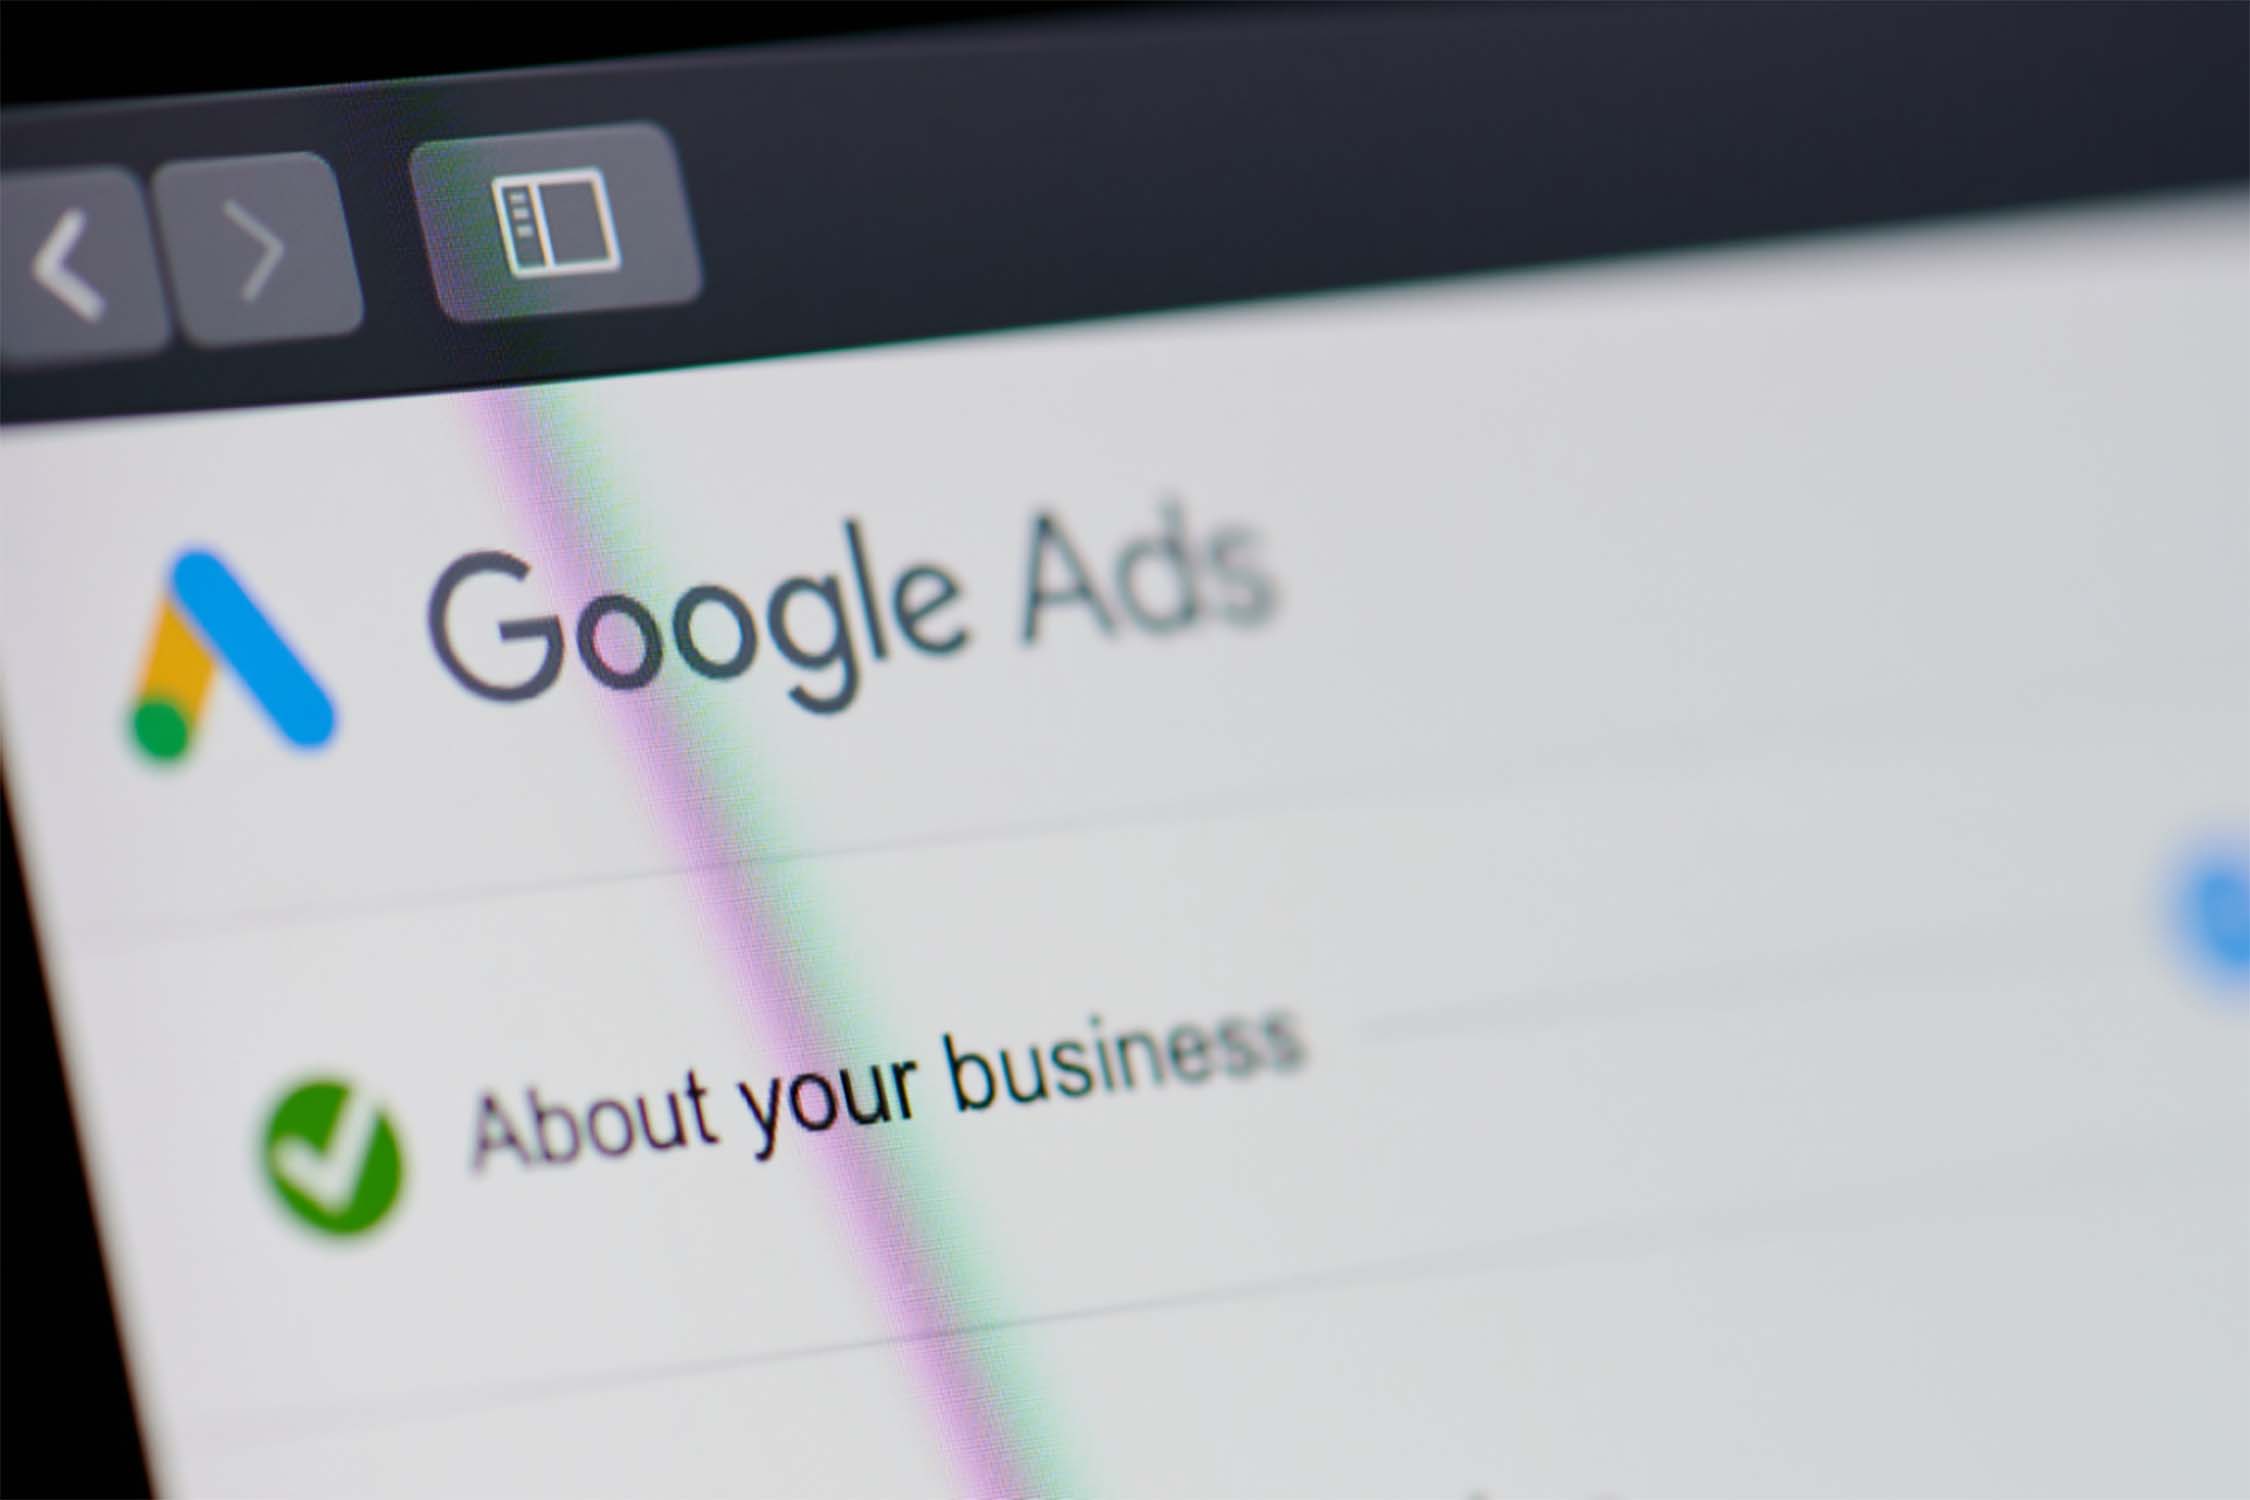 Attribution models on Google Ads: What are my options?